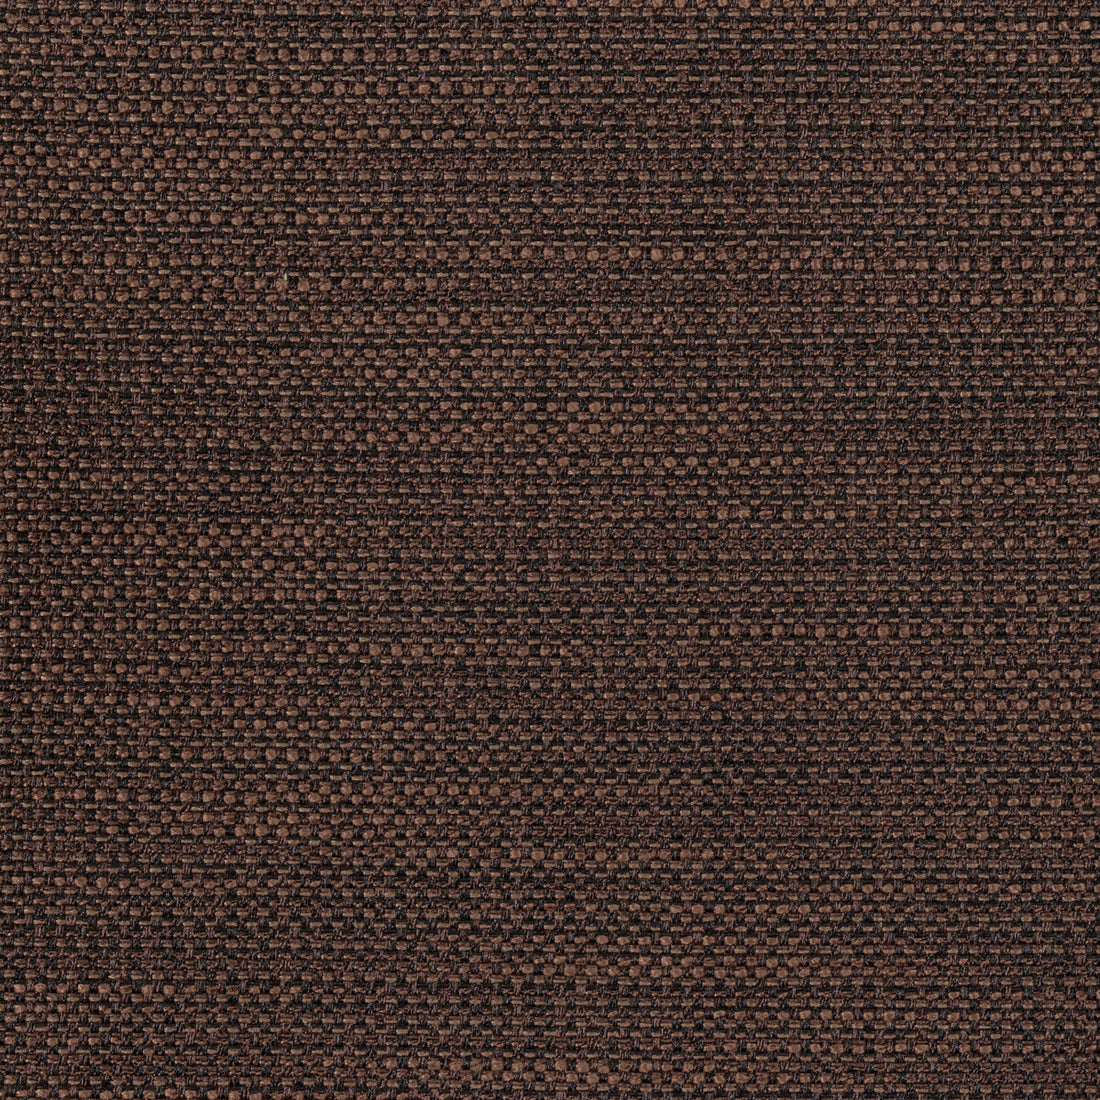 Luma Texture fabric in mocha color - pattern 4947.86.0 - by Kravet Contract in the Fr Window Luma Texture collection